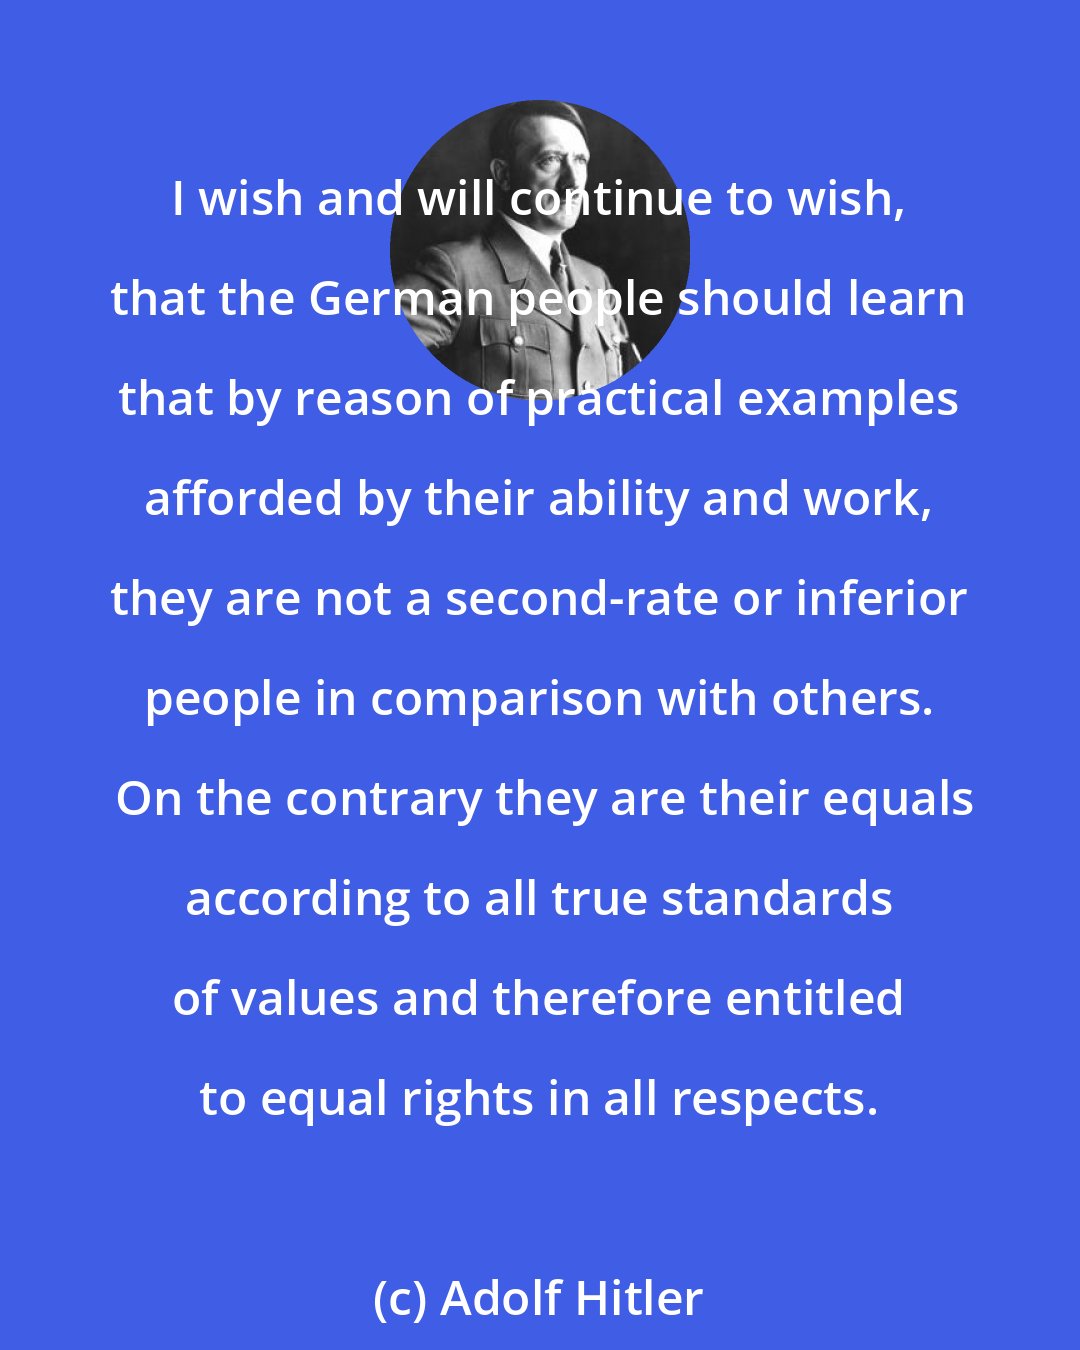 Adolf Hitler: I wish and will continue to wish, that the German people should learn that by reason of practical examples afforded by their ability and work, they are not a second-rate or inferior people in comparison with others.  On the contrary they are their equals according to all true standards of values and therefore entitled to equal rights in all respects.